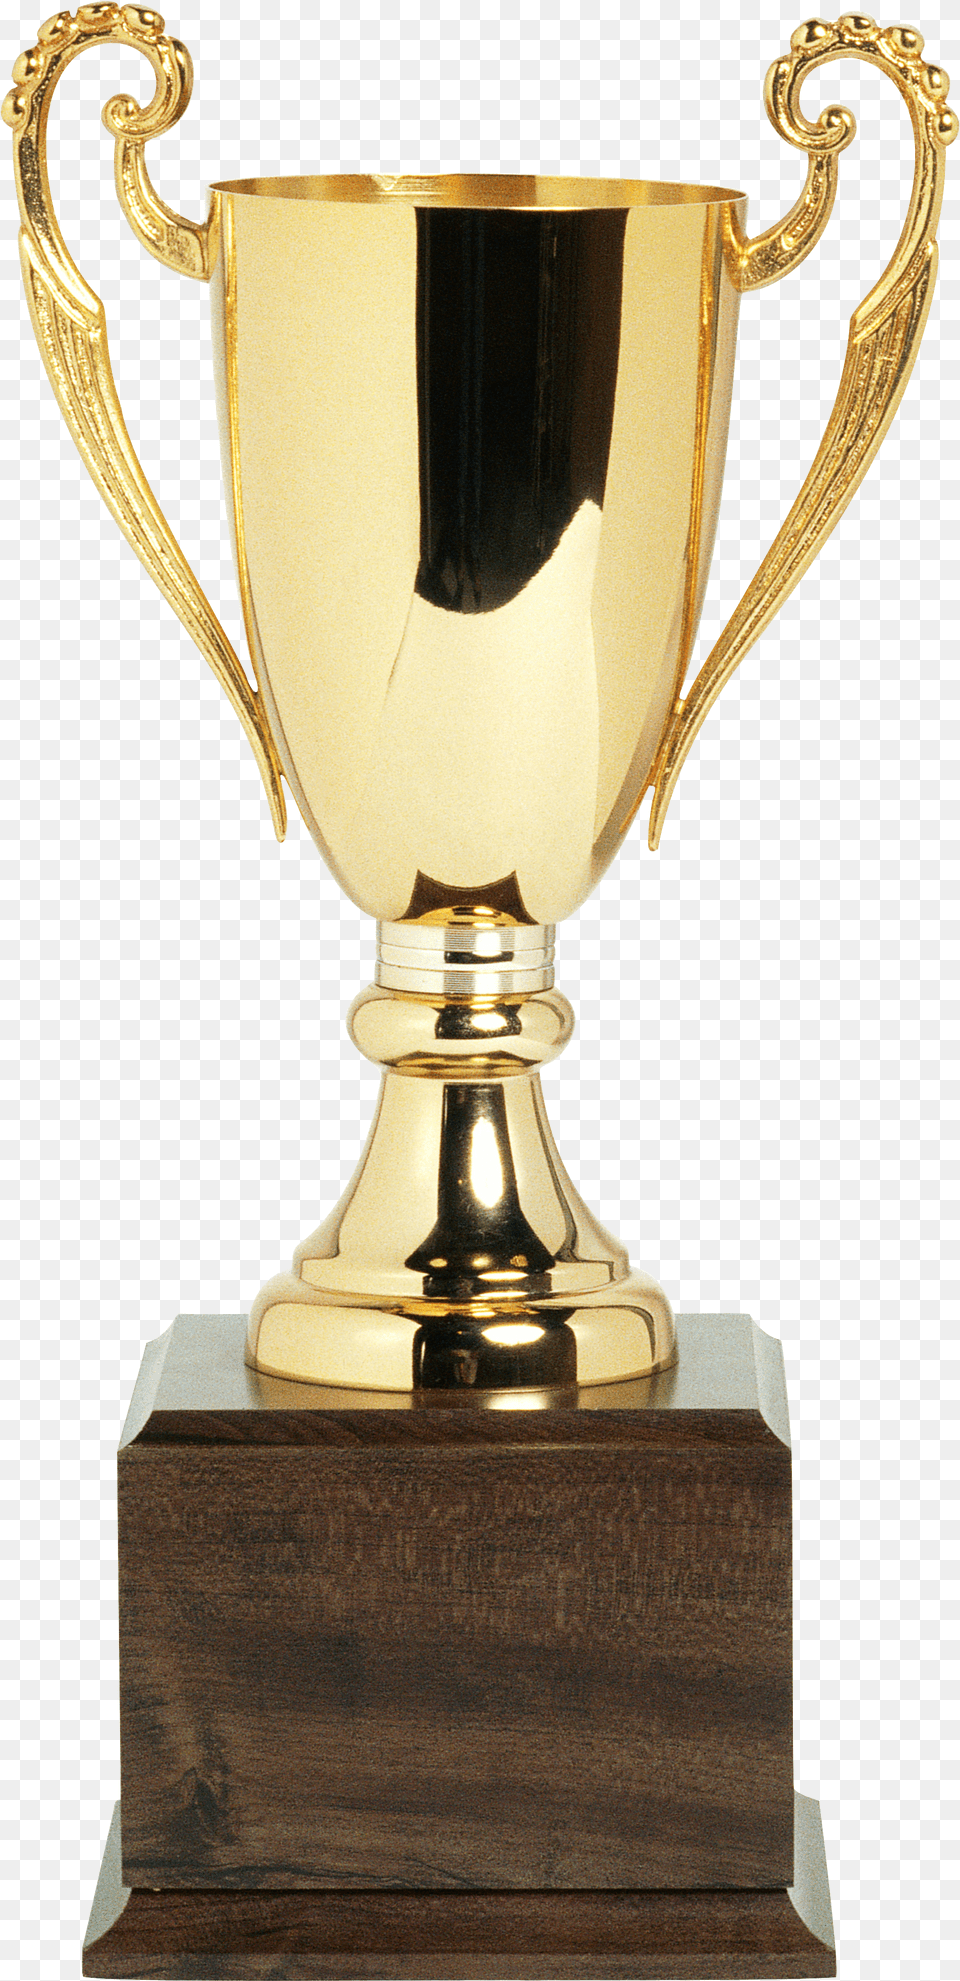 Trophy Golden Microphone Cup Hd Image Soccer Cup Trophy Free Png Download